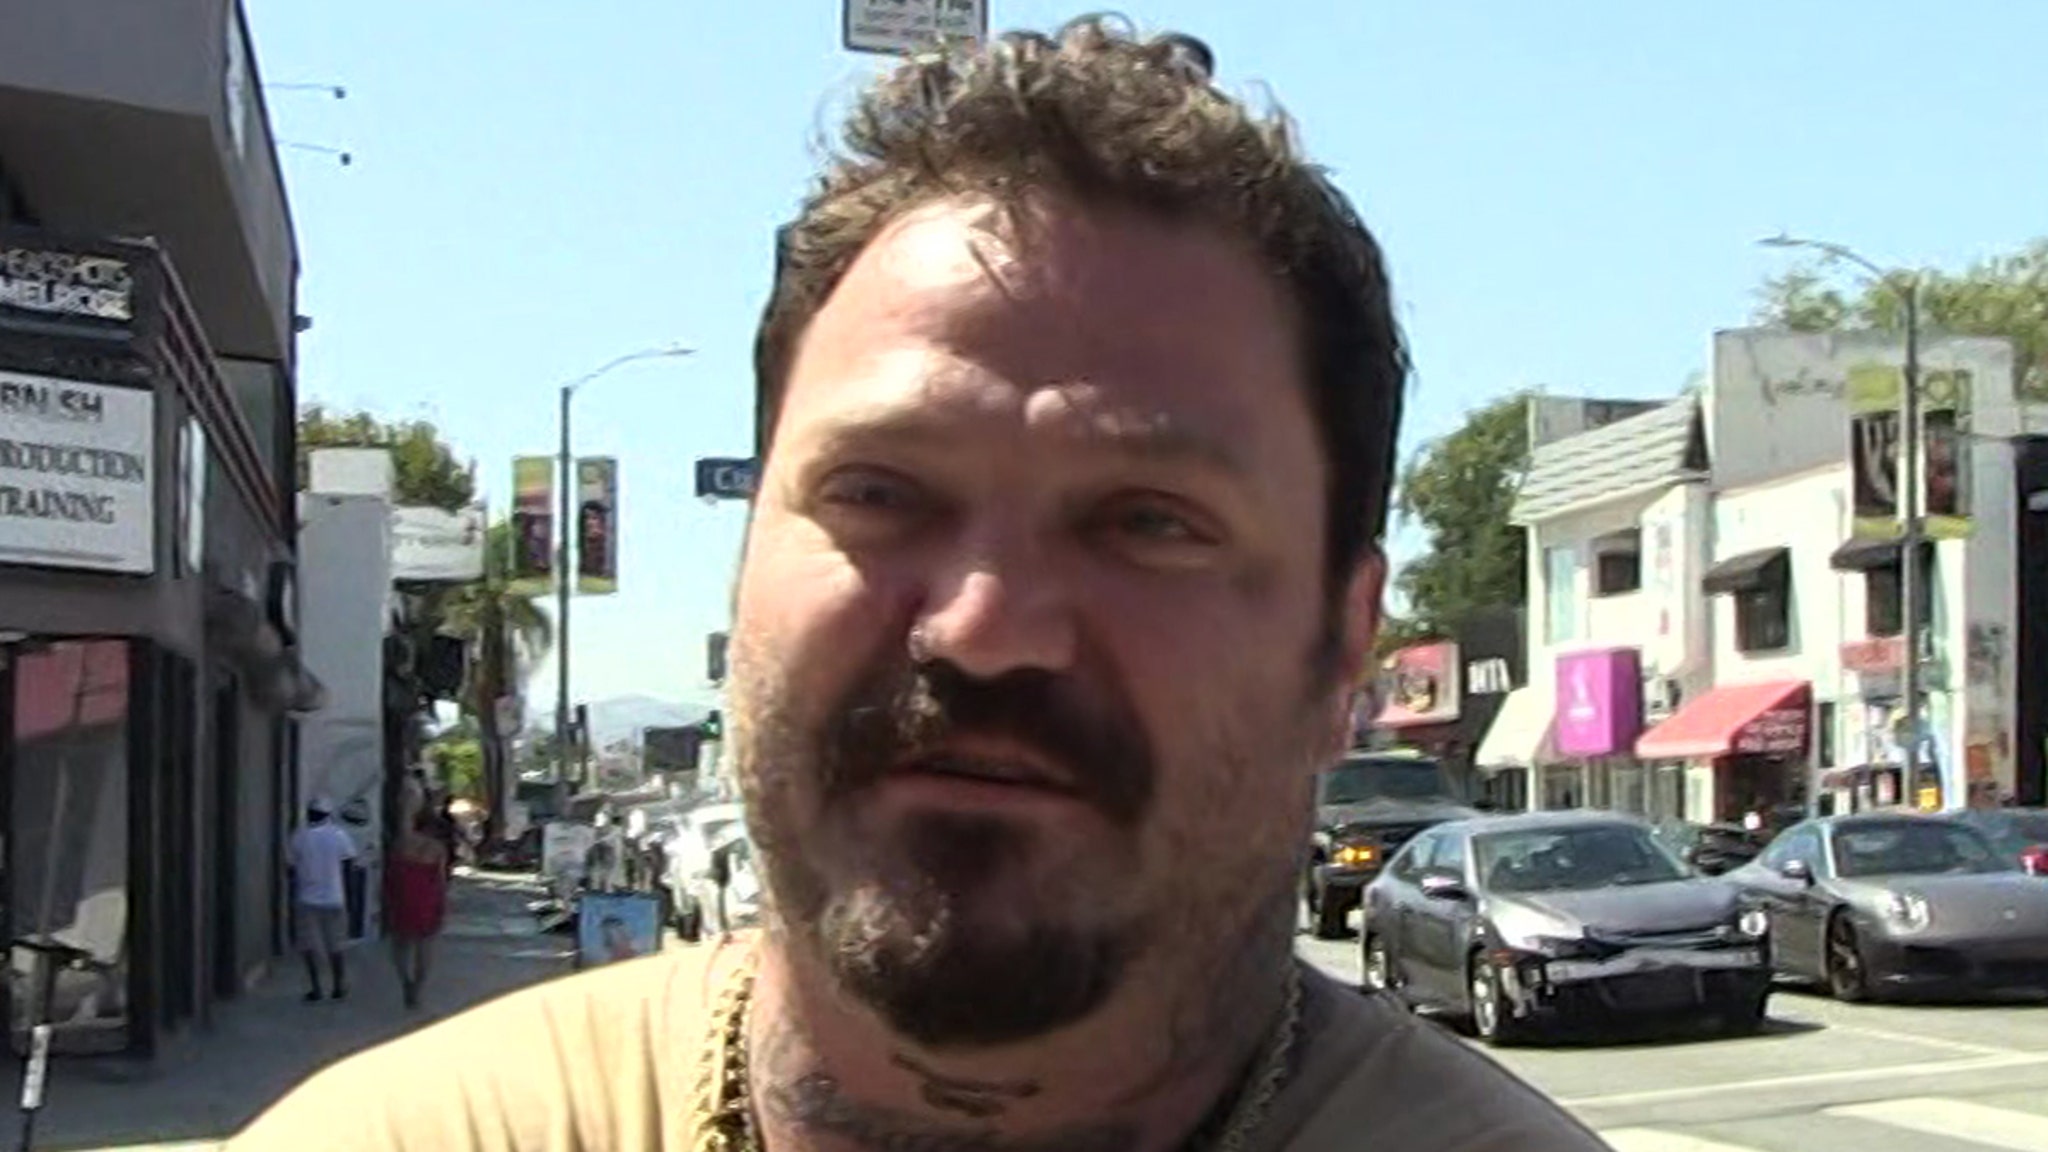 Bam Margera Reported Missing Again from Rehab Facility – TMZ